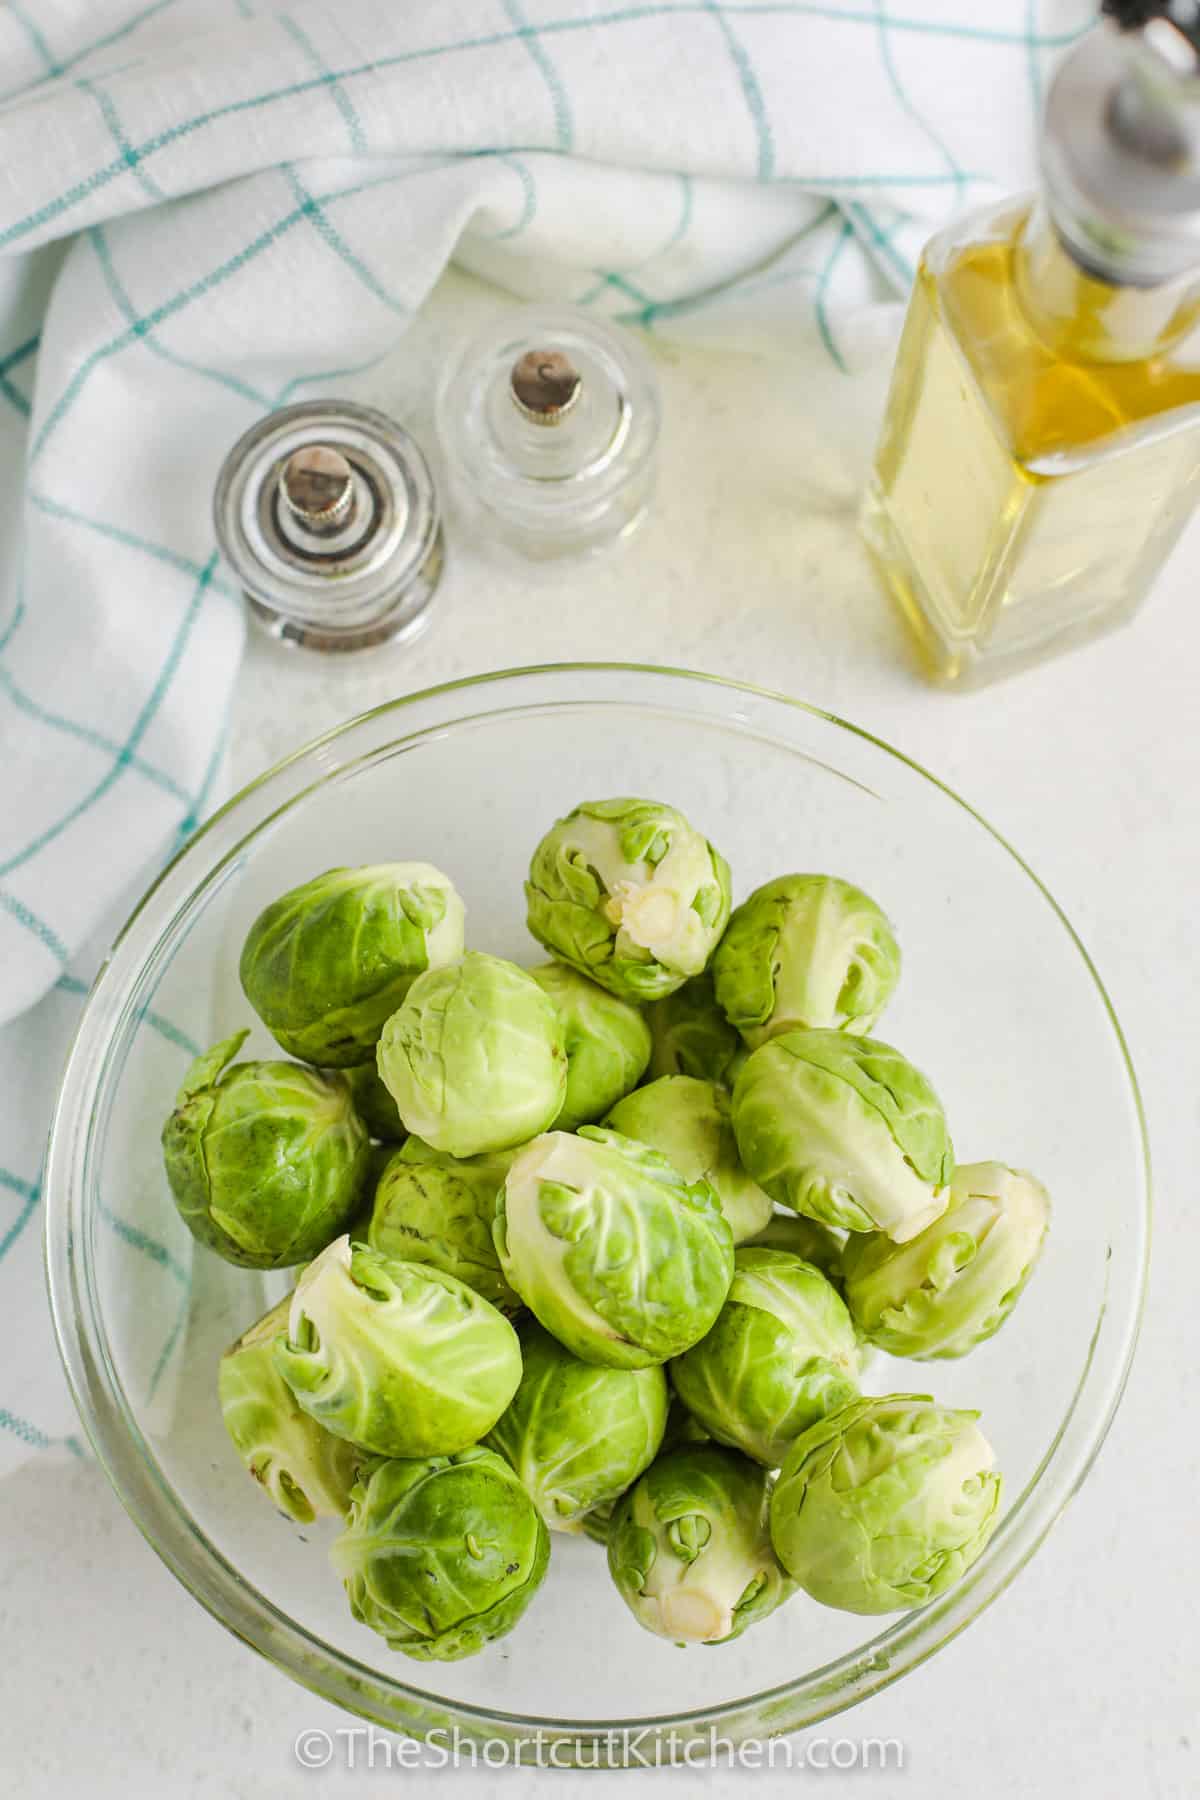 ingredients to make Air Fryer Brussel Sprouts Recipe